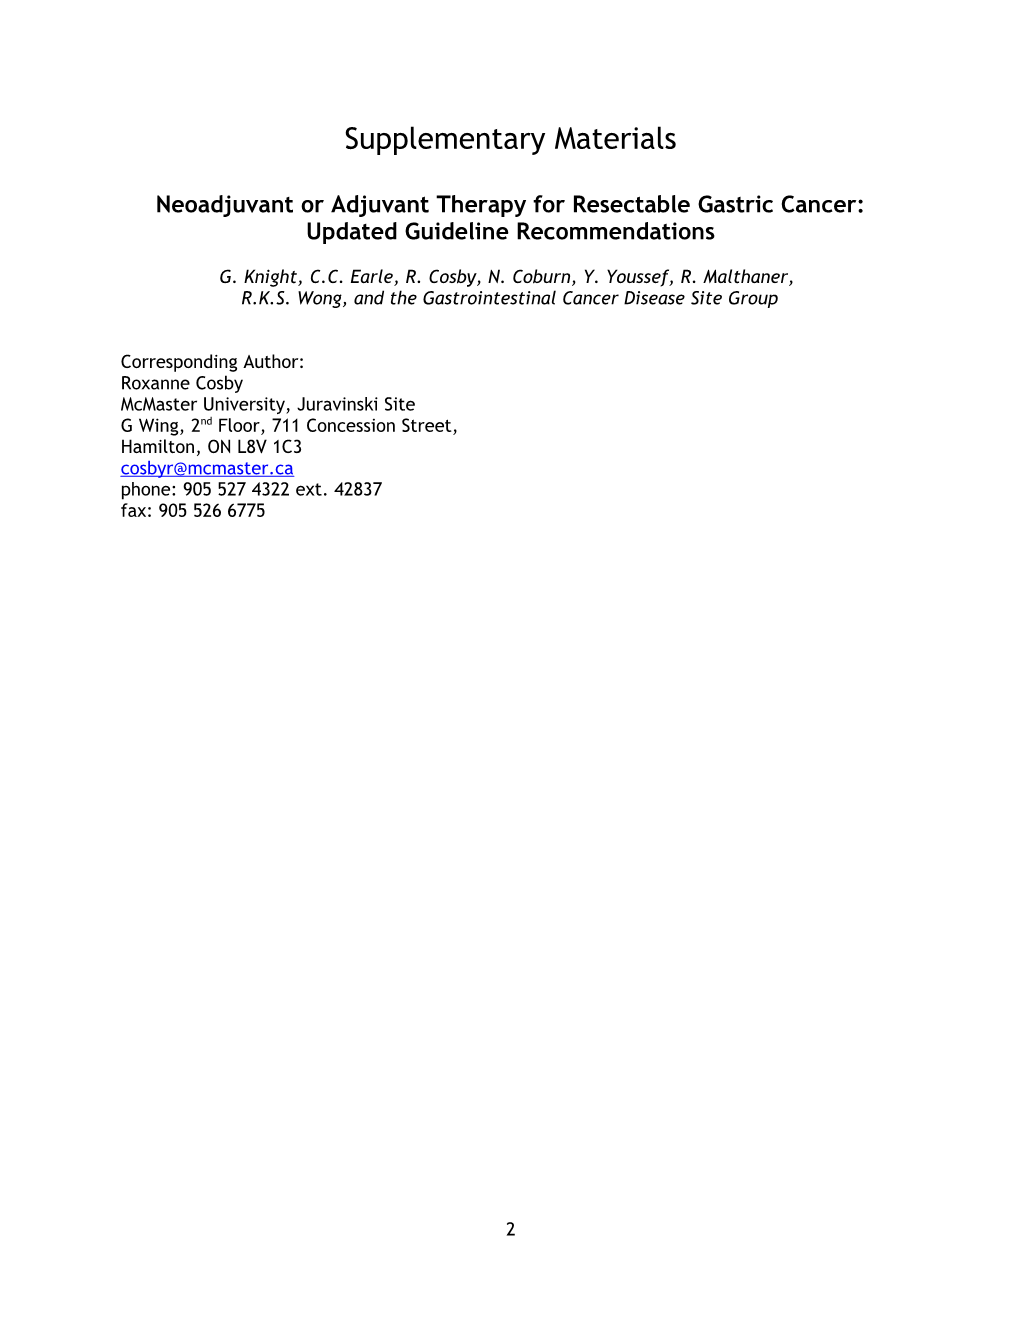 Neoadjuvant Or Adjuvant Therapy for Resectable Gastric Cancer